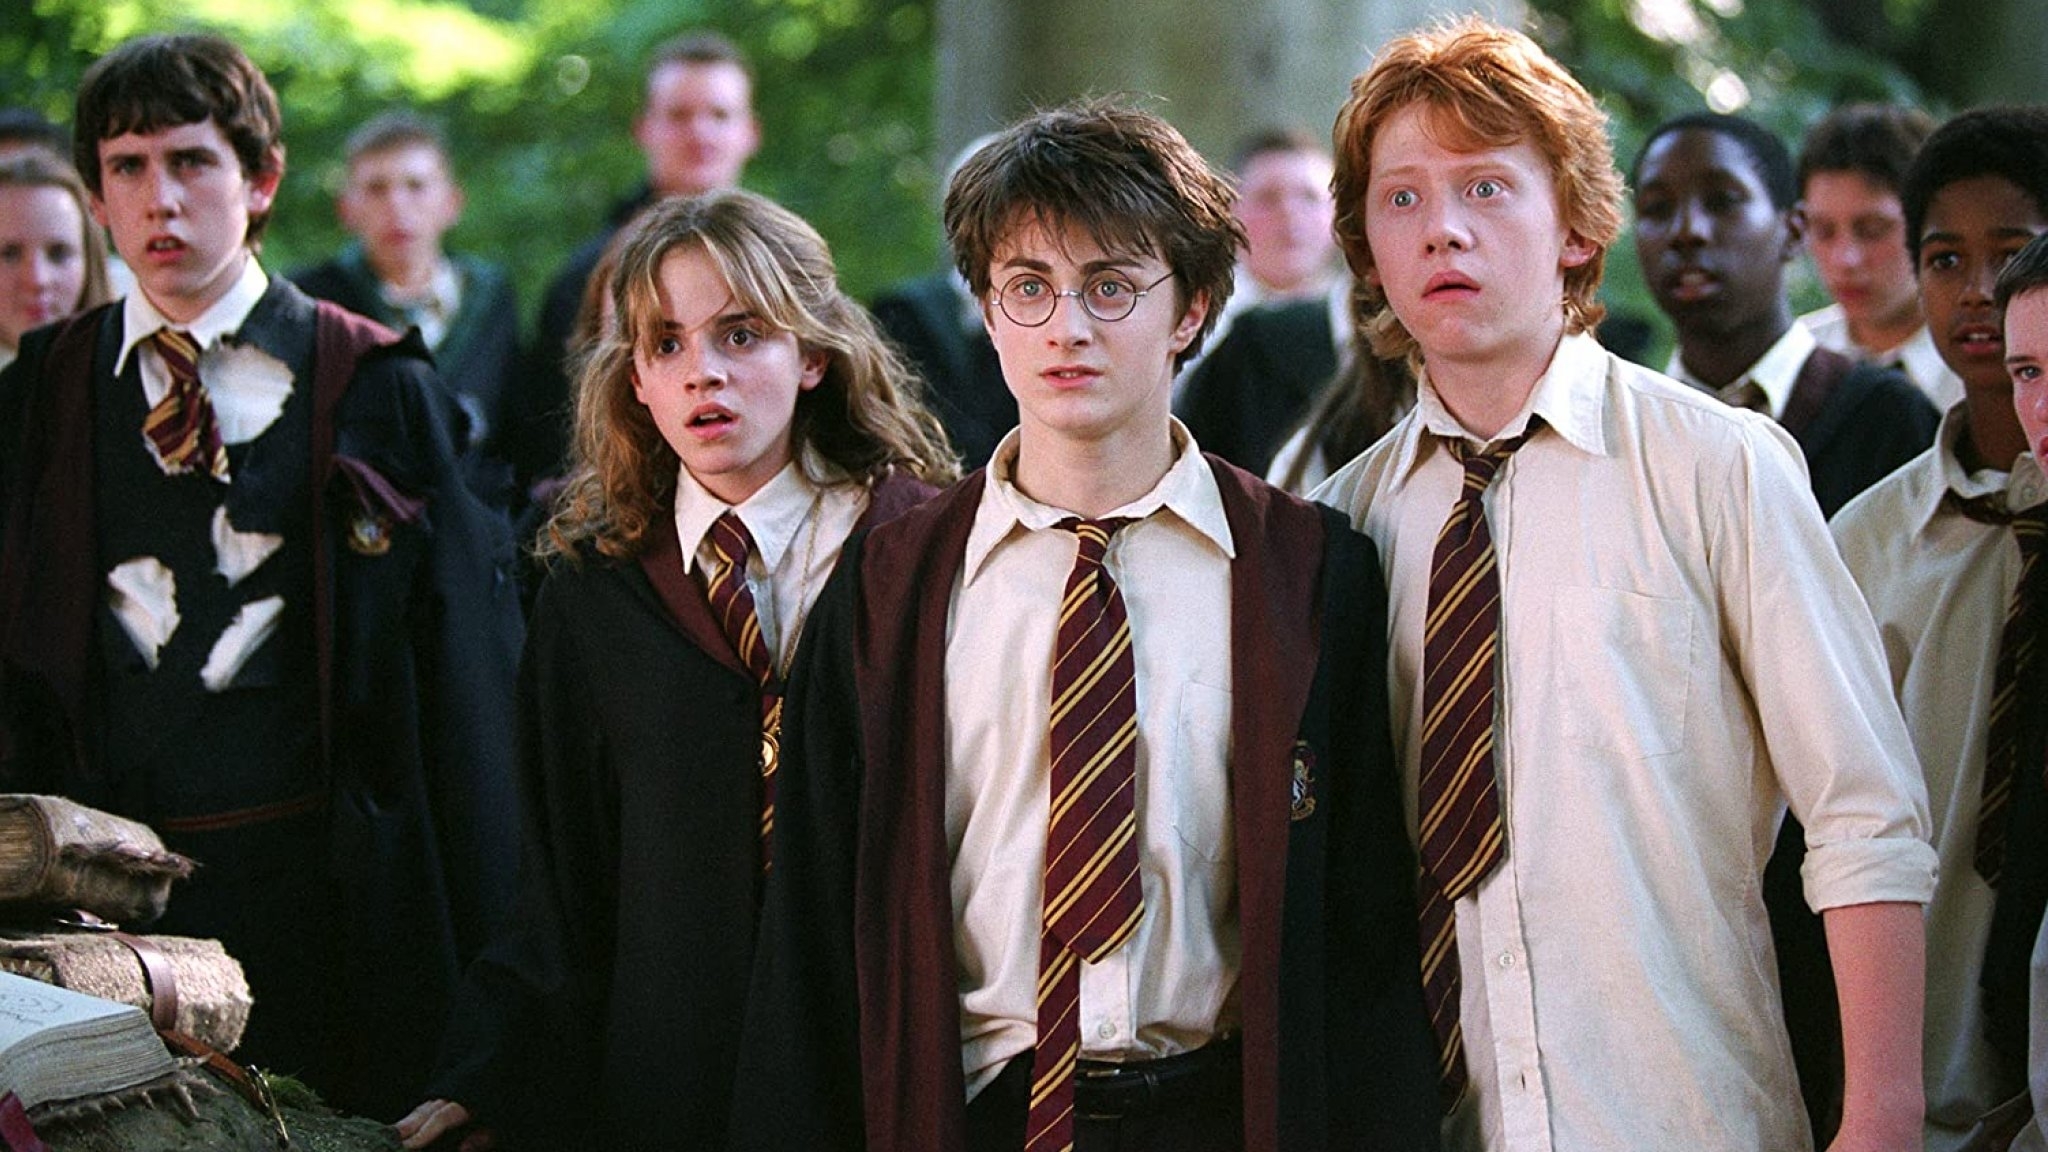 Hermione, Harry, and Ron from &quot;Harry Potter&quot; in school uniforms, looking surprised